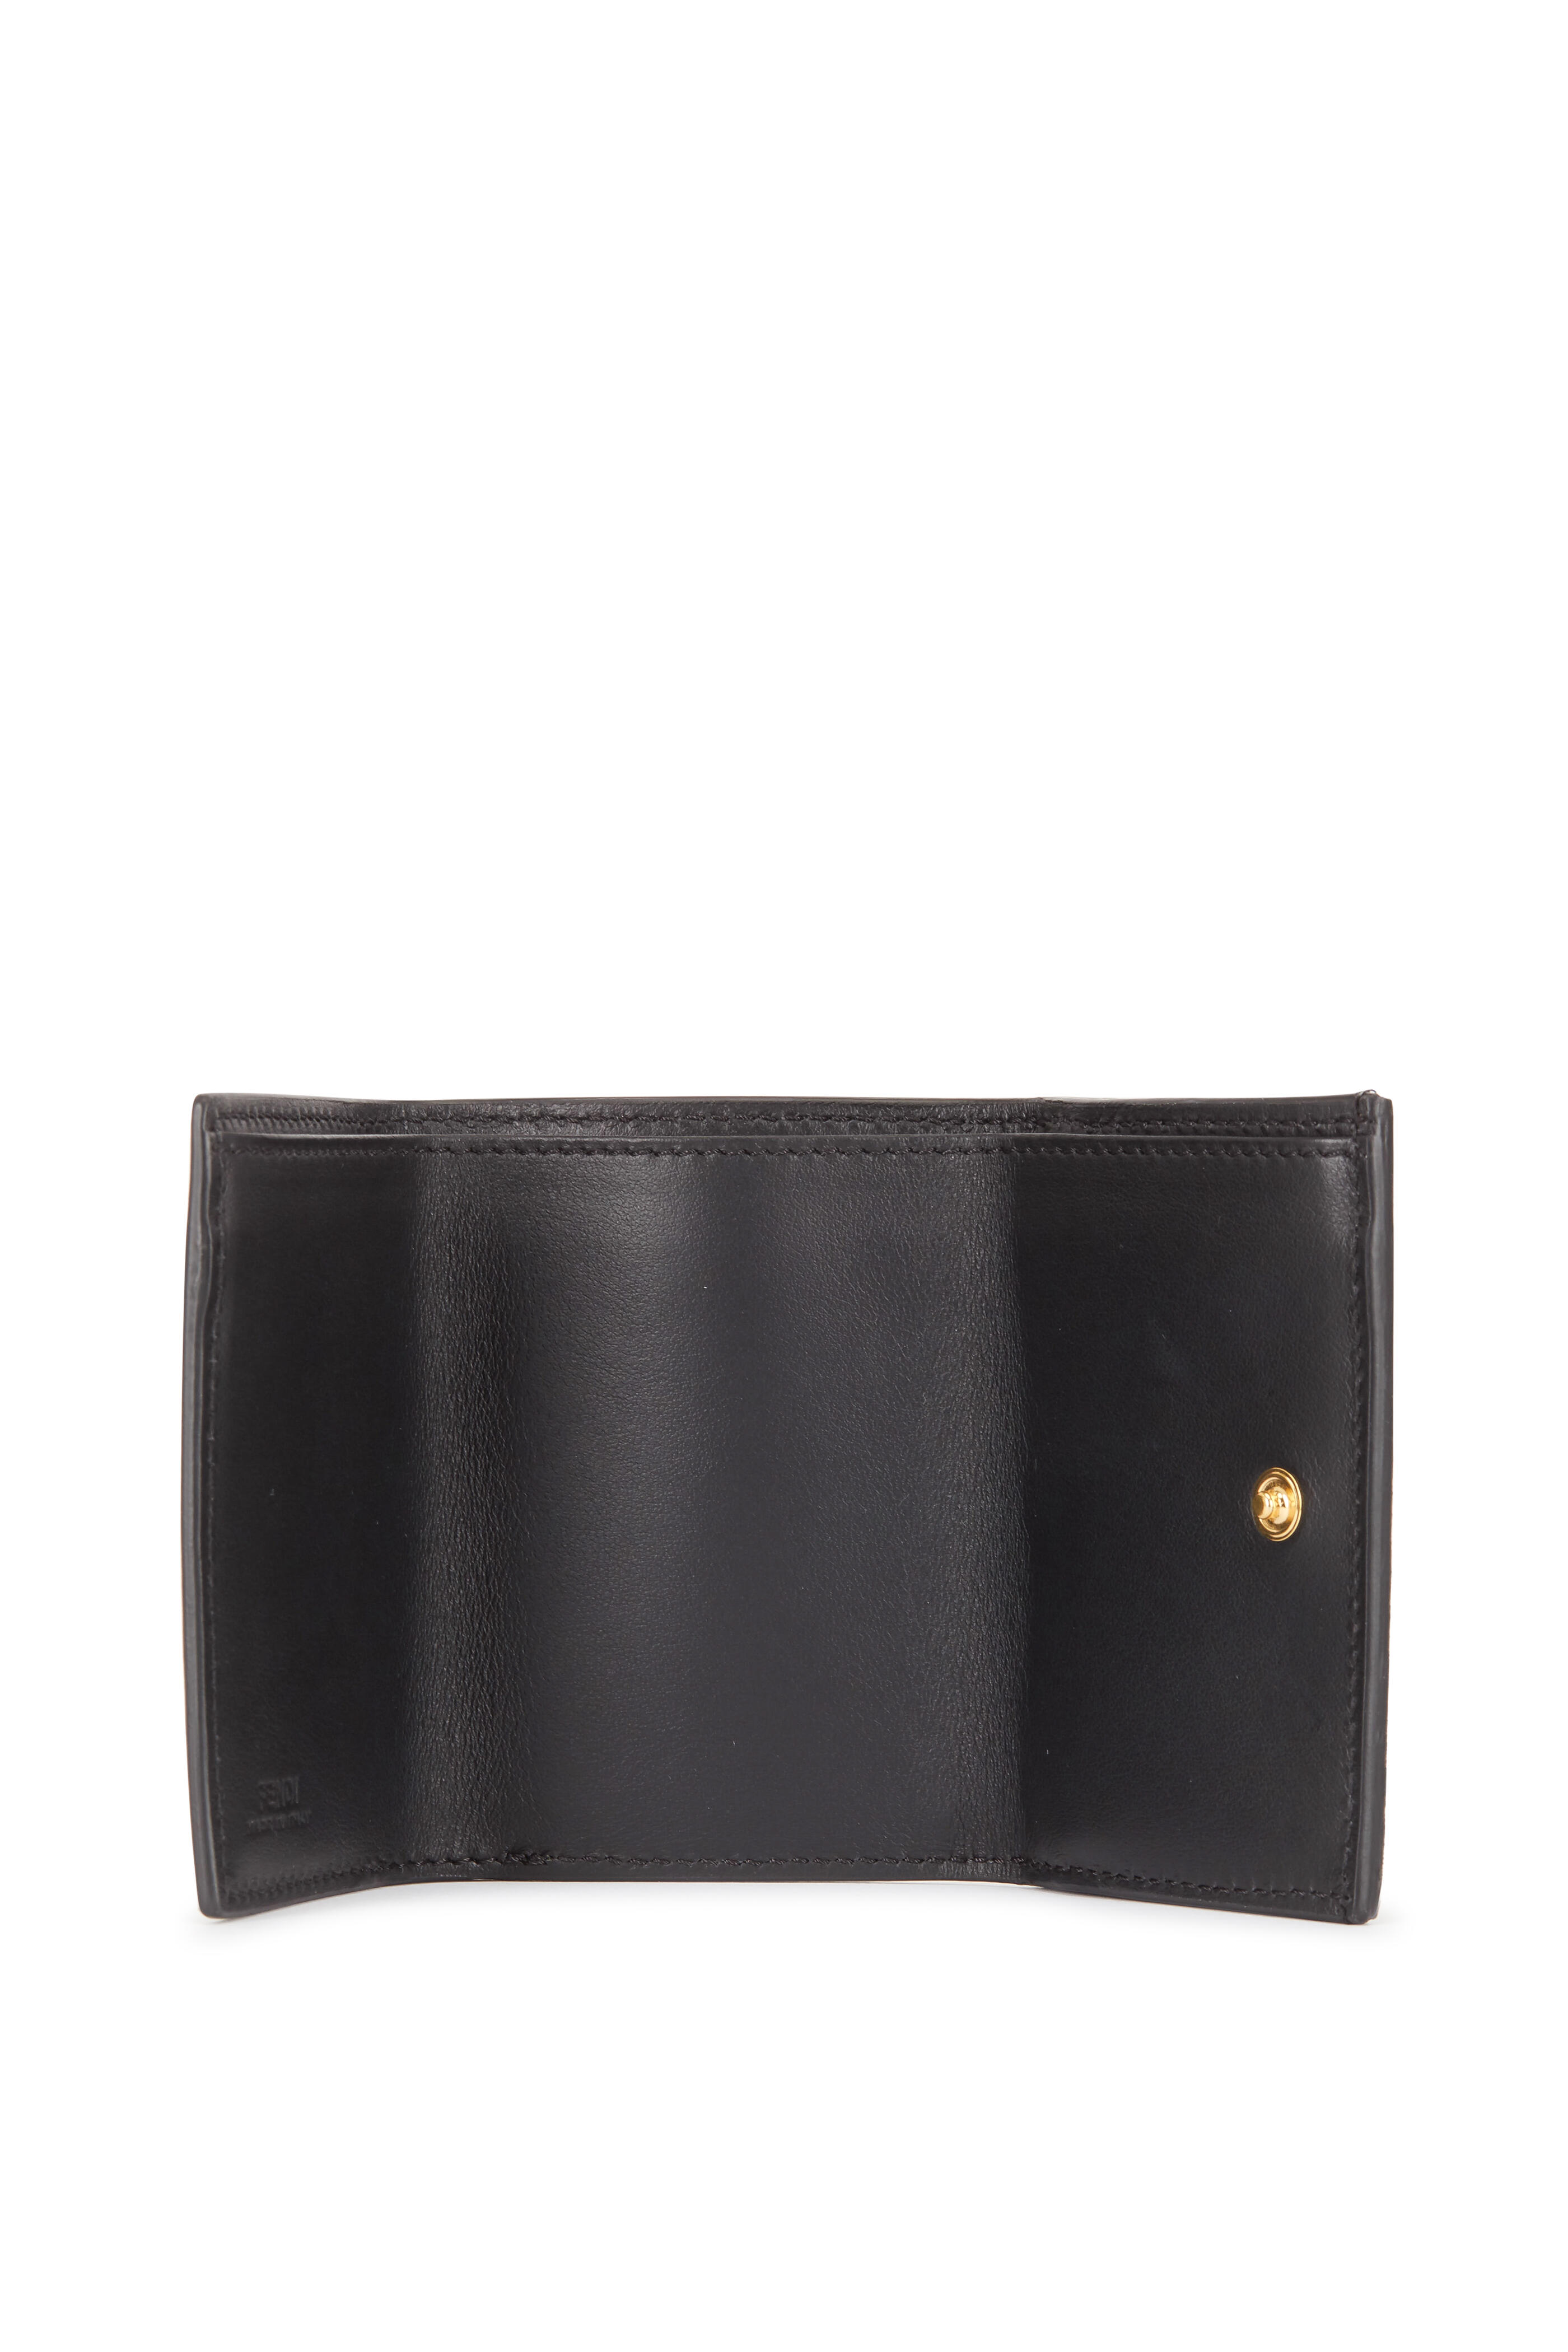 Fendi Micro Trifold Wallet Multicolor in Leather with Gold-tone - US